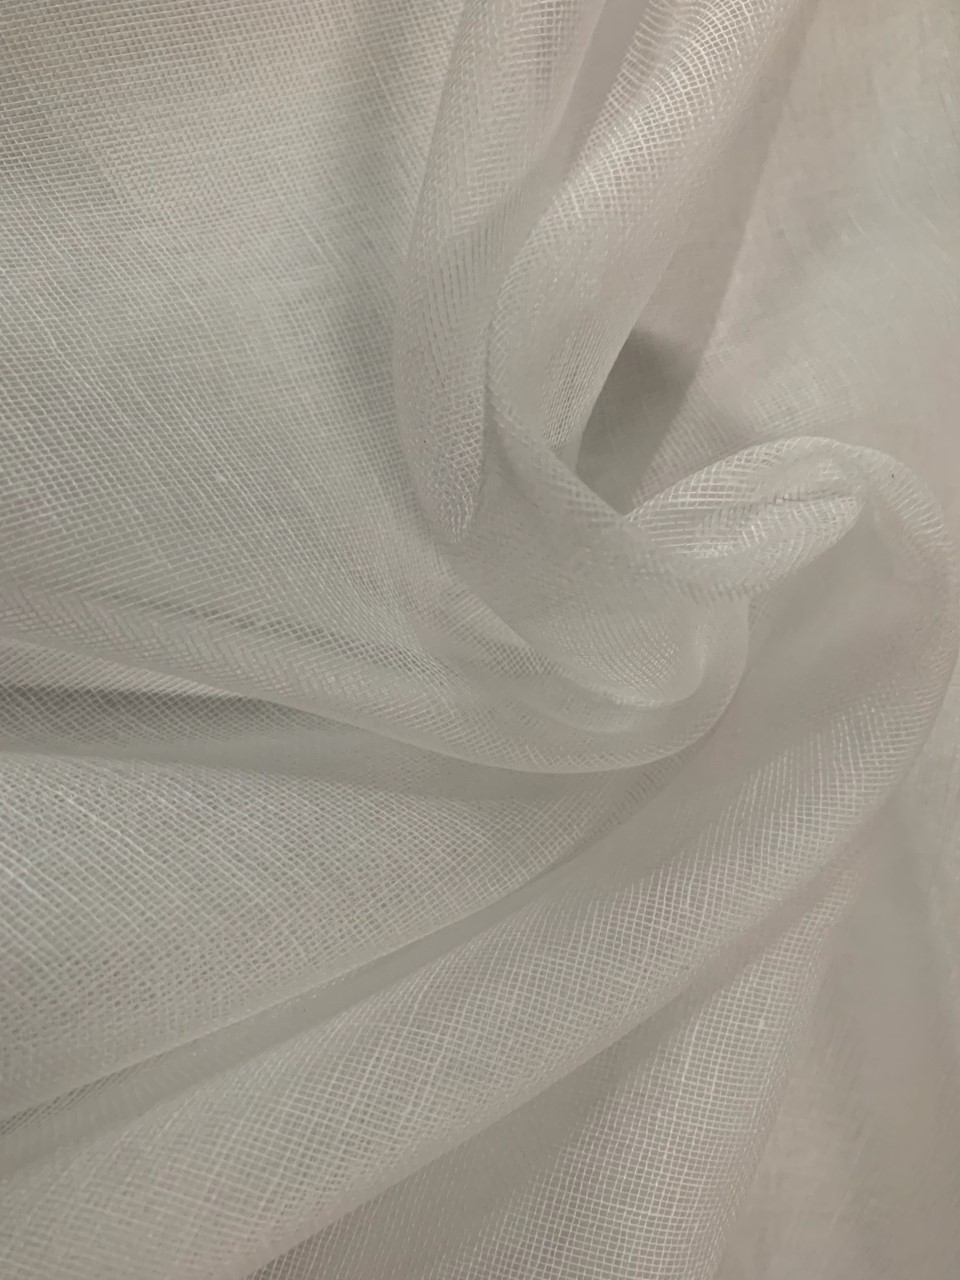 30" Wide Grade 60 White Cheesecloth - 1000 Yard Roll